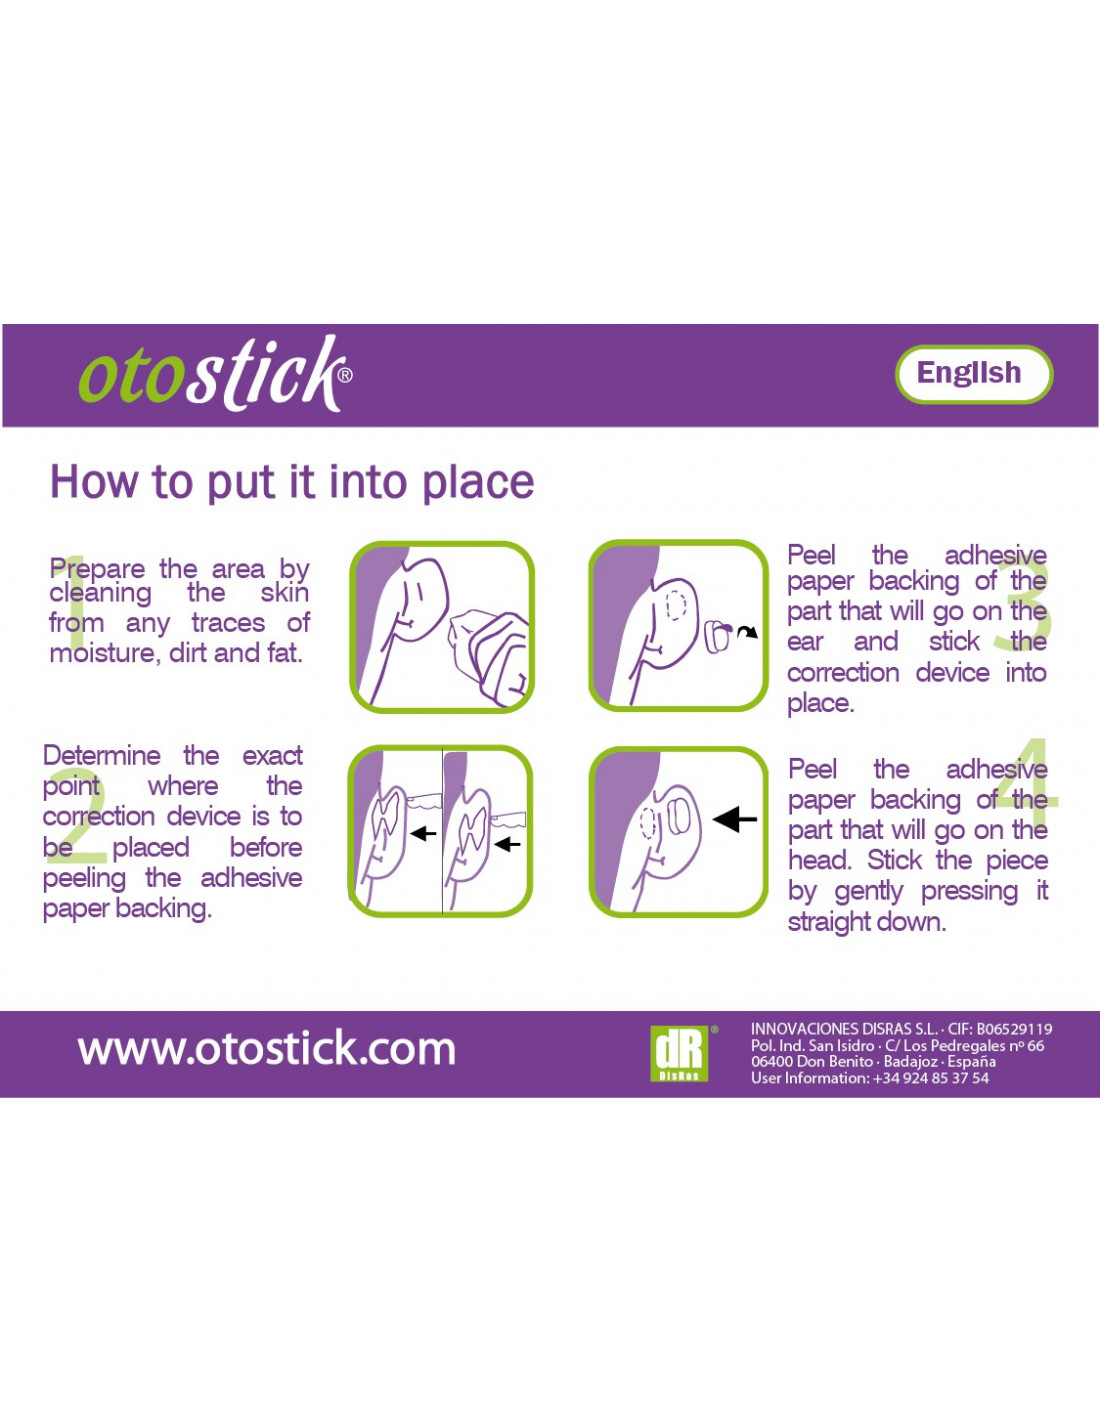 otostick - OtoTip: Once Otostick is placed, apply gentle pressure